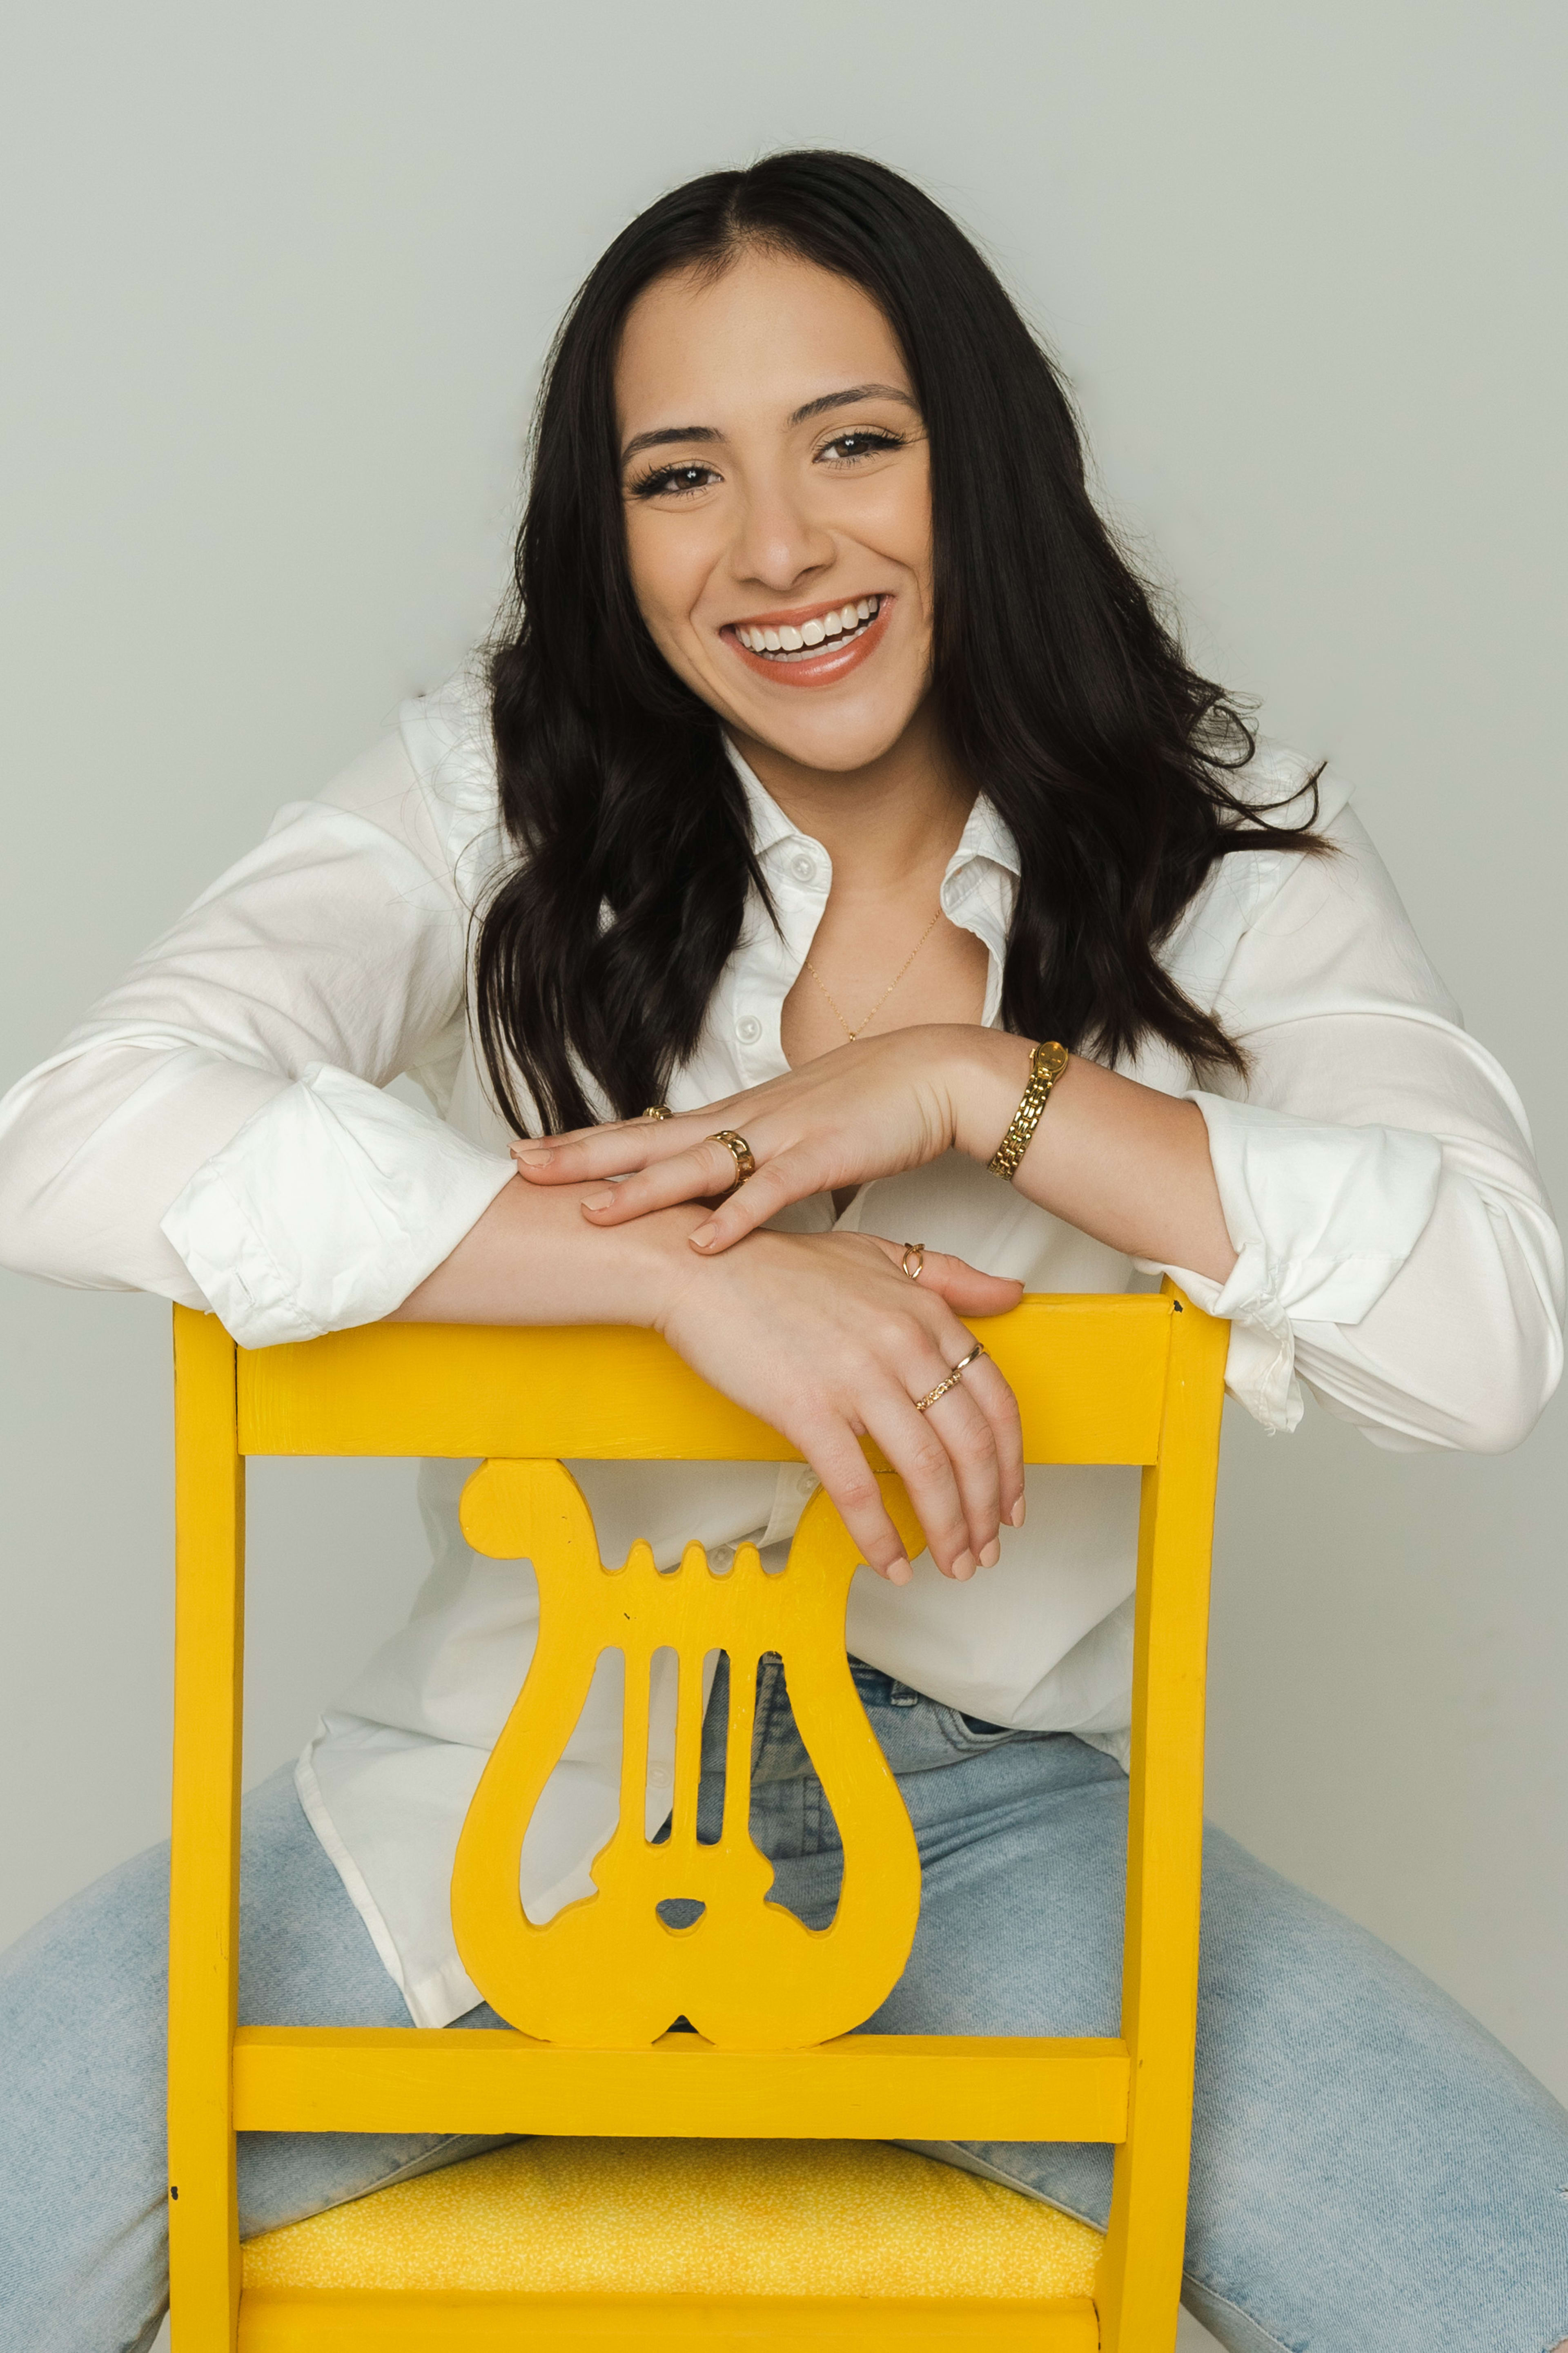 A portrait of a woman sitting on top of a yellow chair.